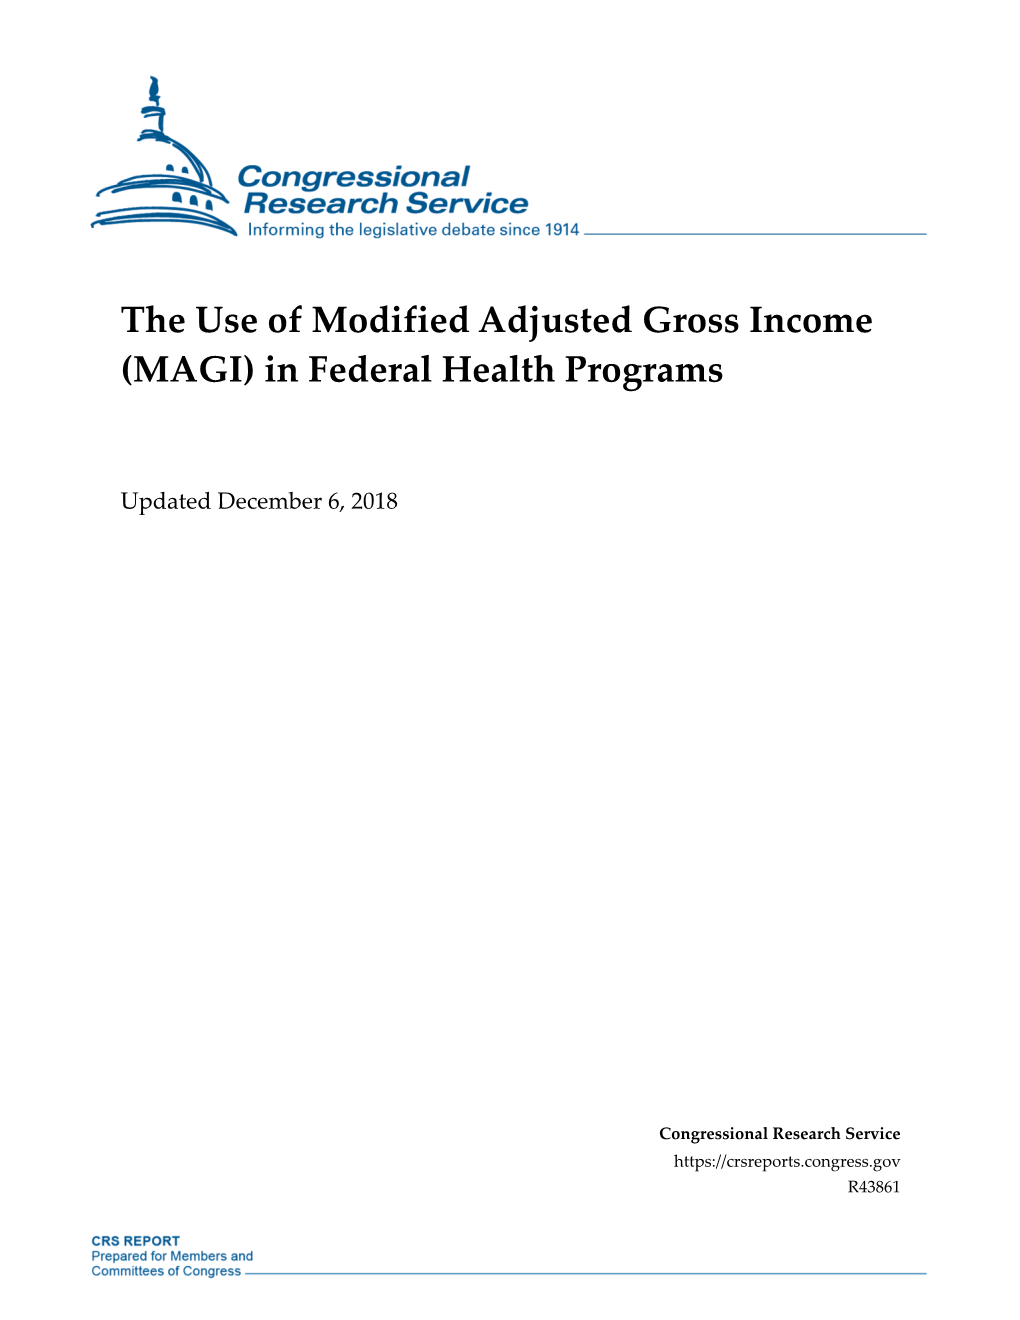 The Use of Modified Adjusted Gross Income (MAGI) in Federal Health Programs